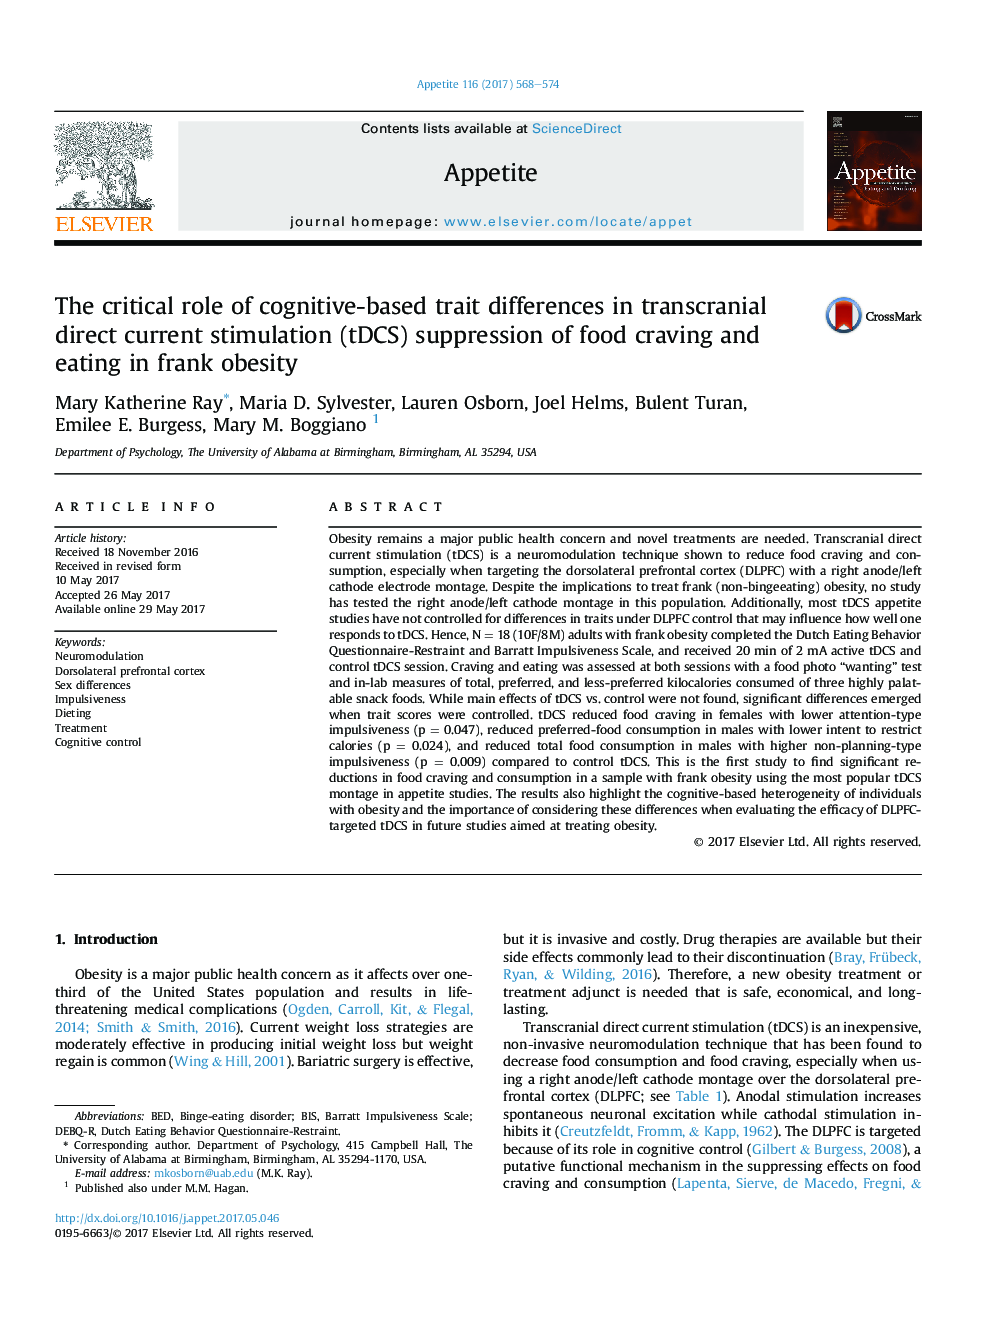 The critical role of cognitive-based trait differences in transcranial direct current stimulation (tDCS) suppression of food craving and eating in frank obesity